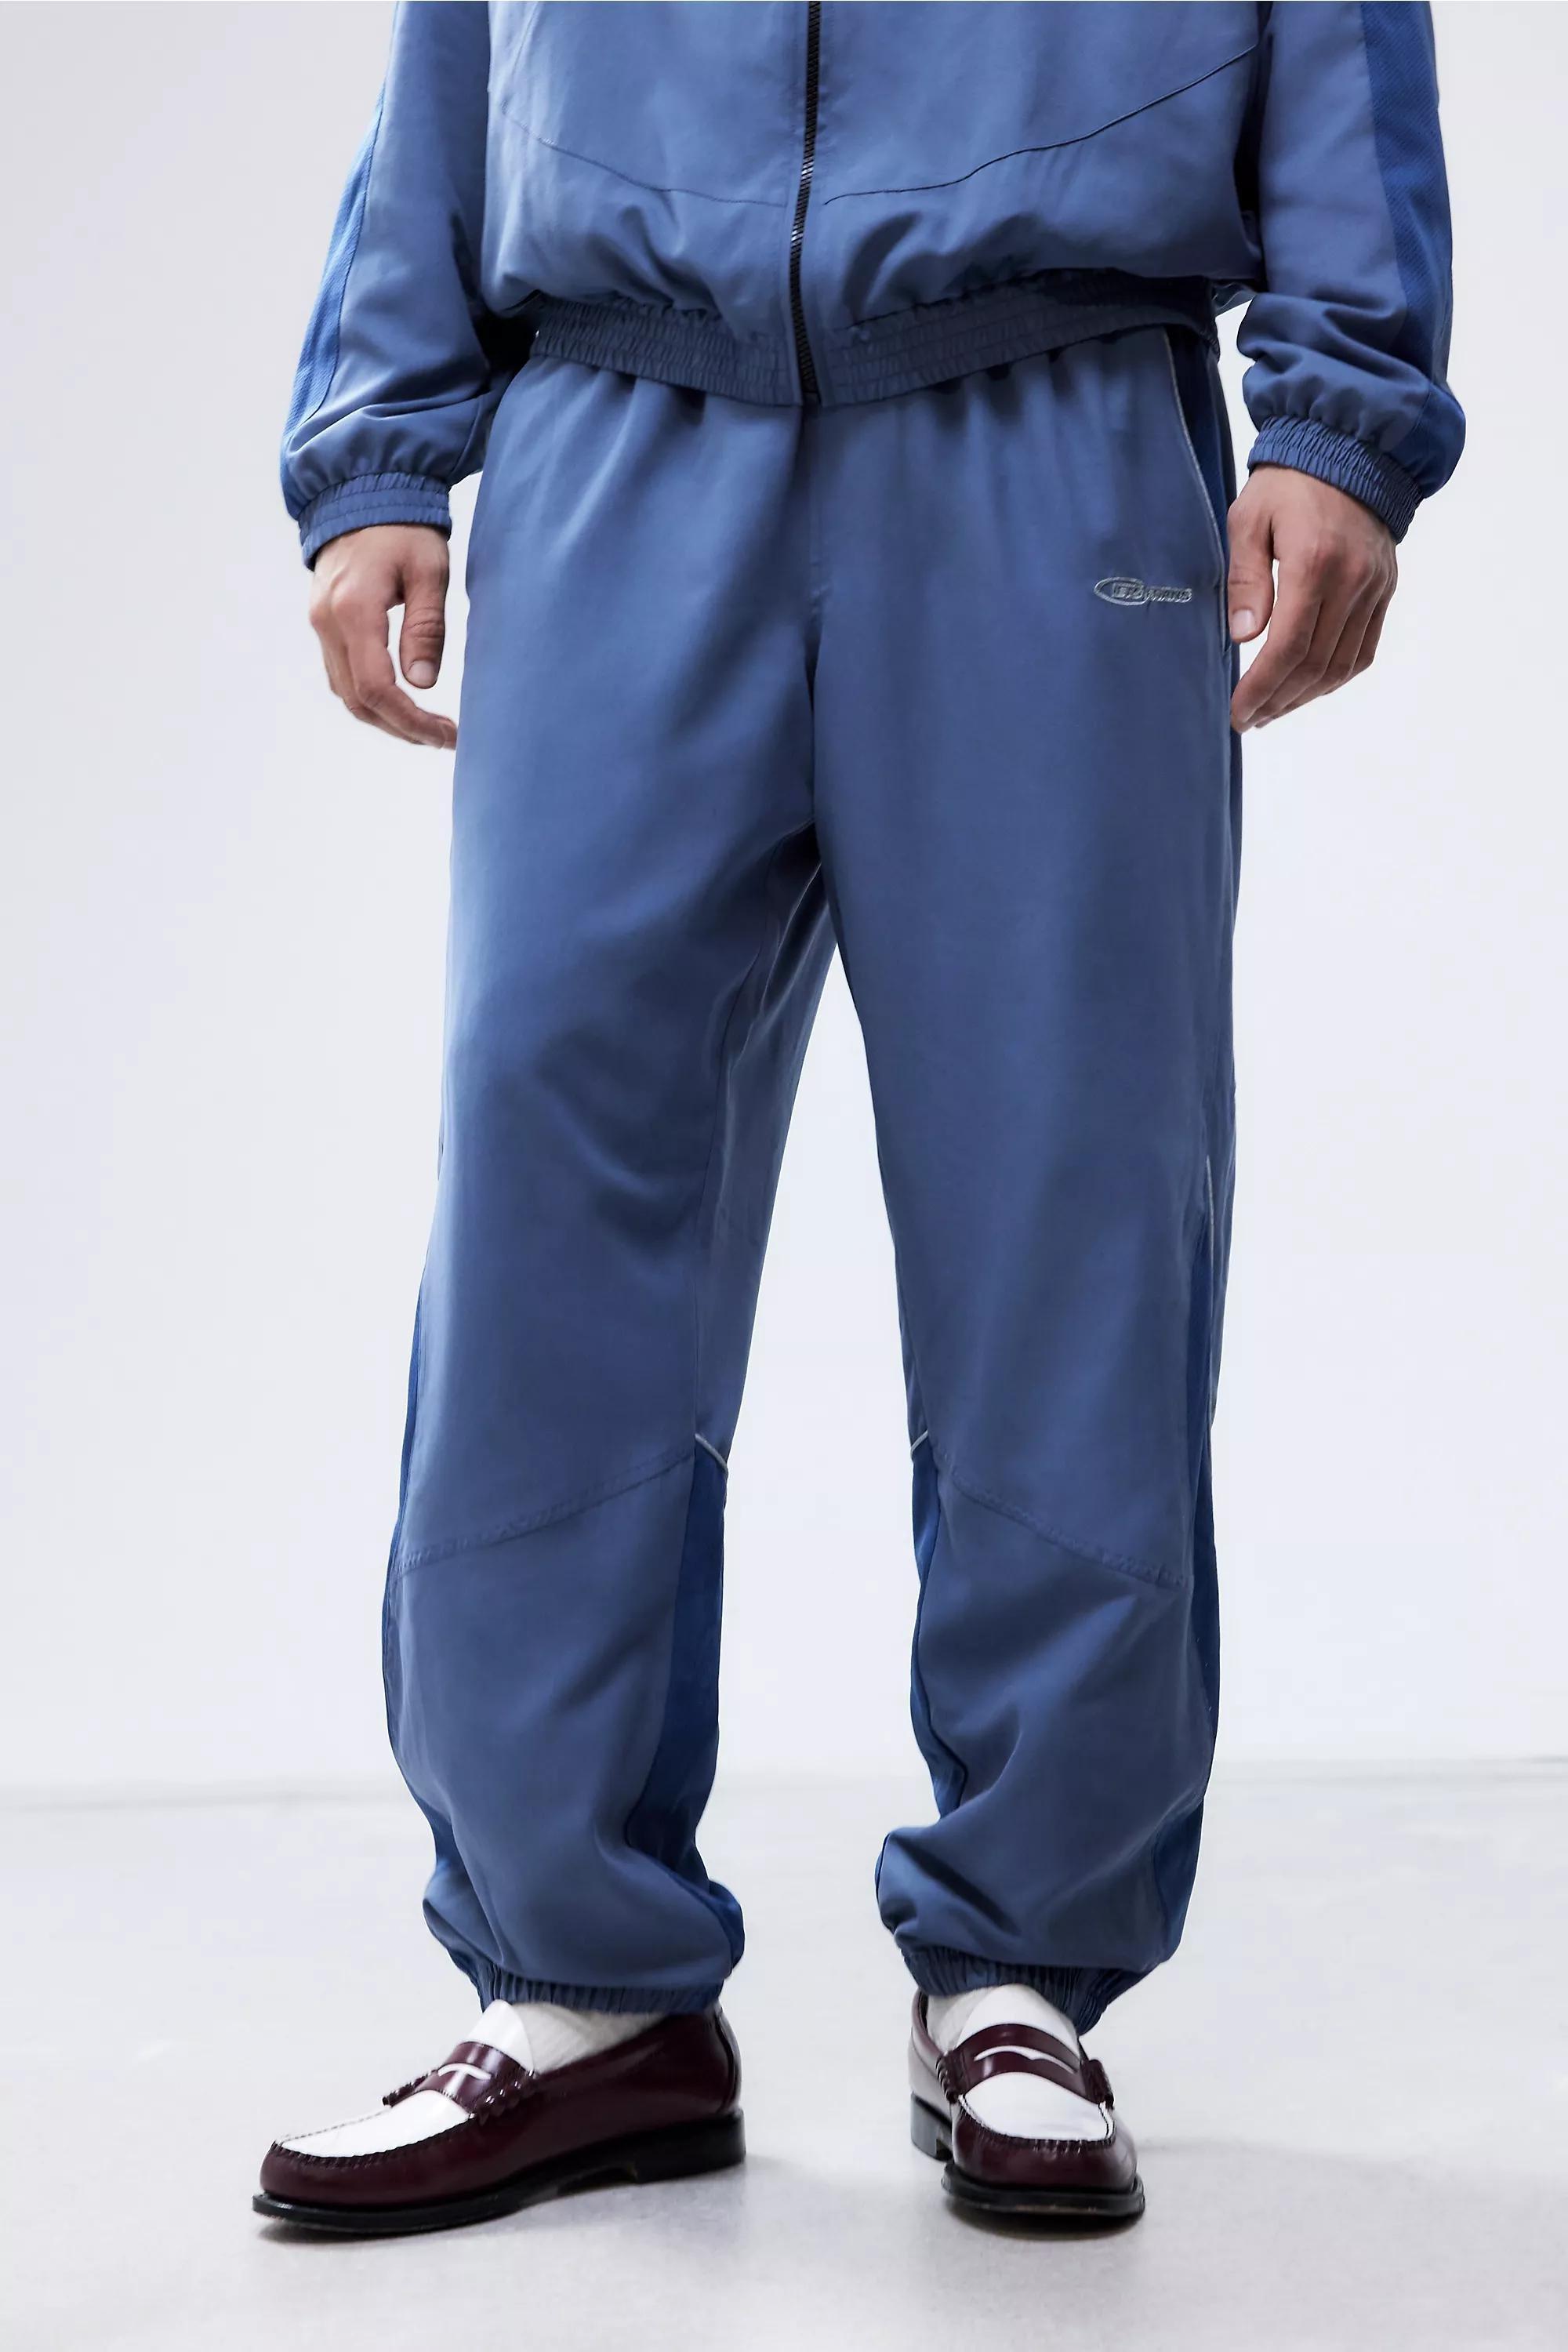 Urban Outfitters - Navy Track Pants